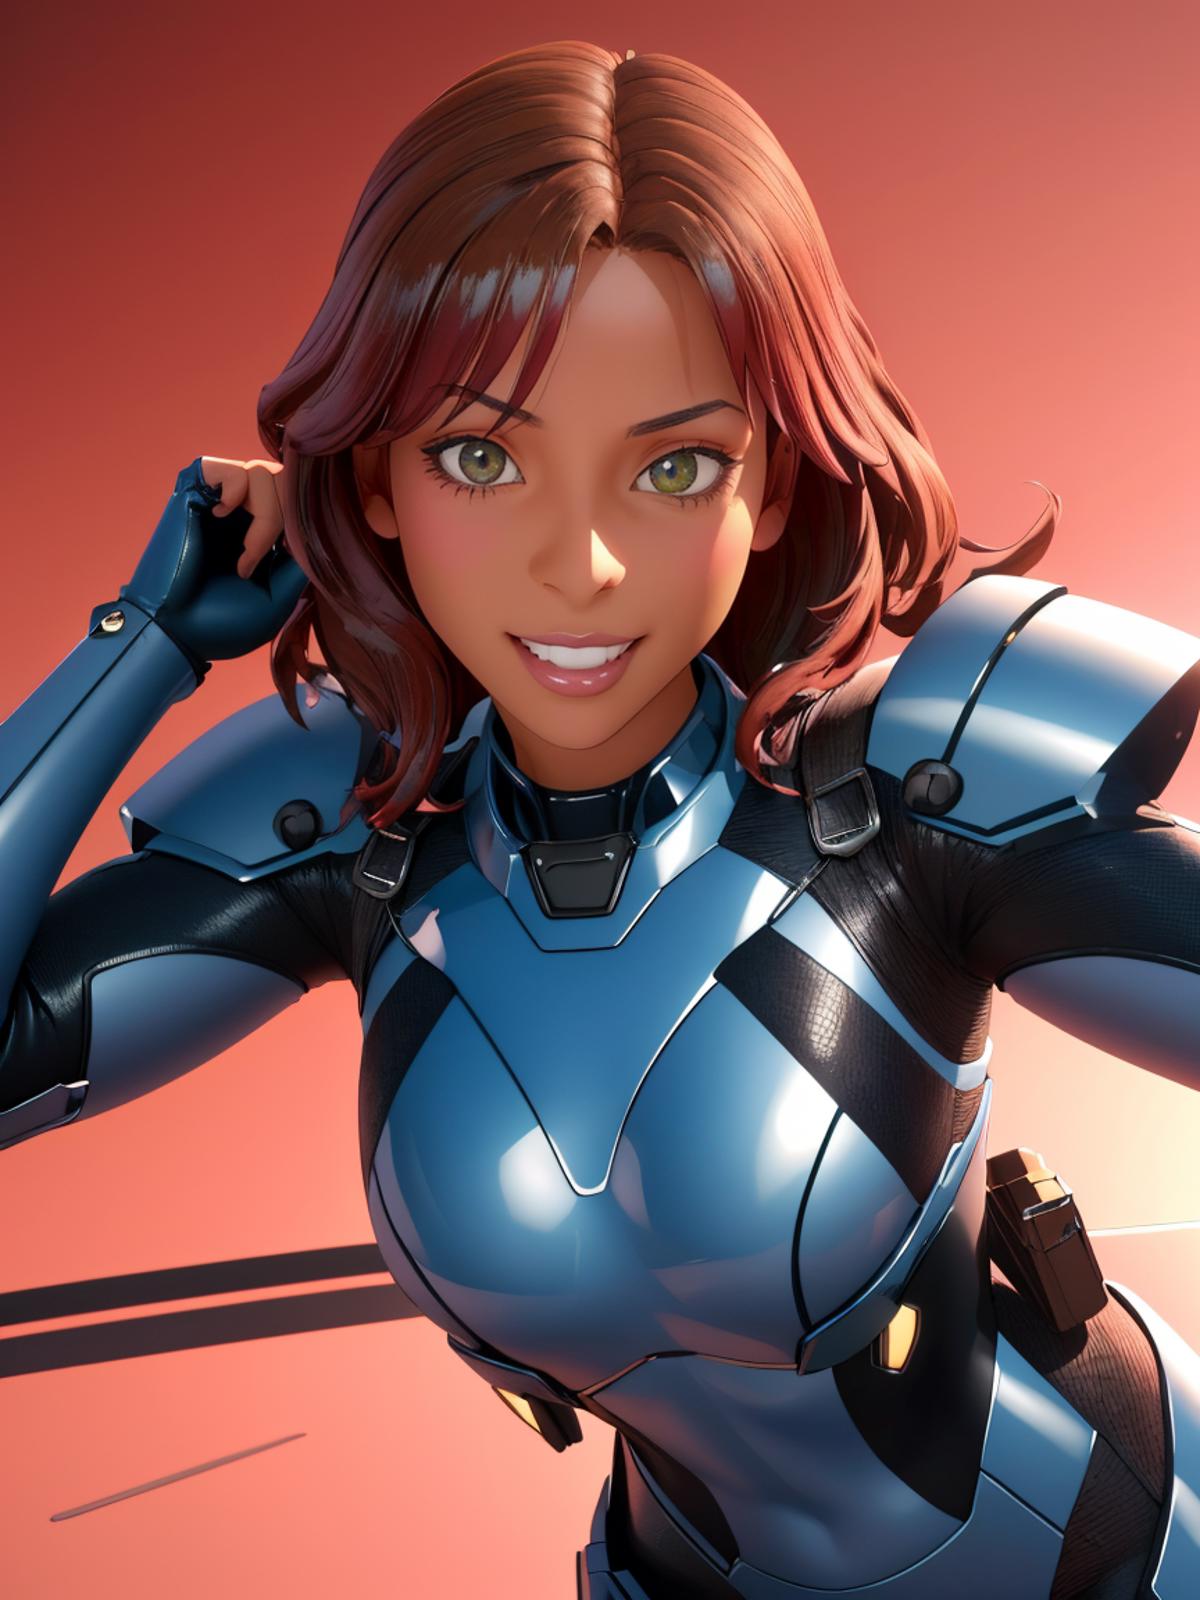 A cartoon woman with brown hair, wearing a blue outfit, posing confidently.